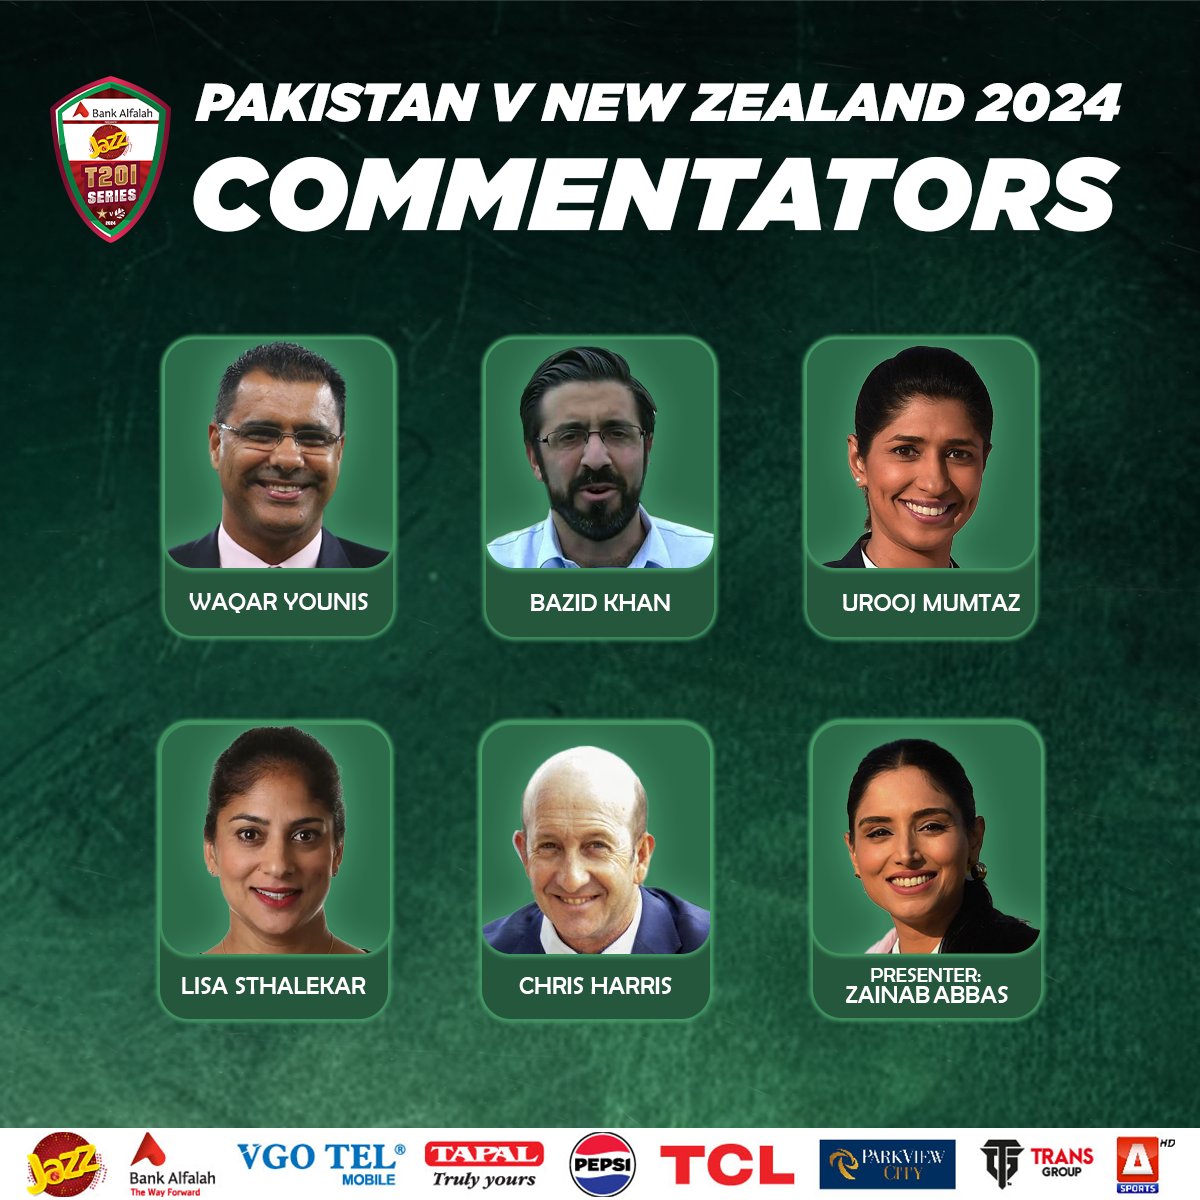 📢 Announcing the announcers 📢 The commentary panel for the #PAKvNZ T20I series 🤩 #AaTenuMatchDikhawan